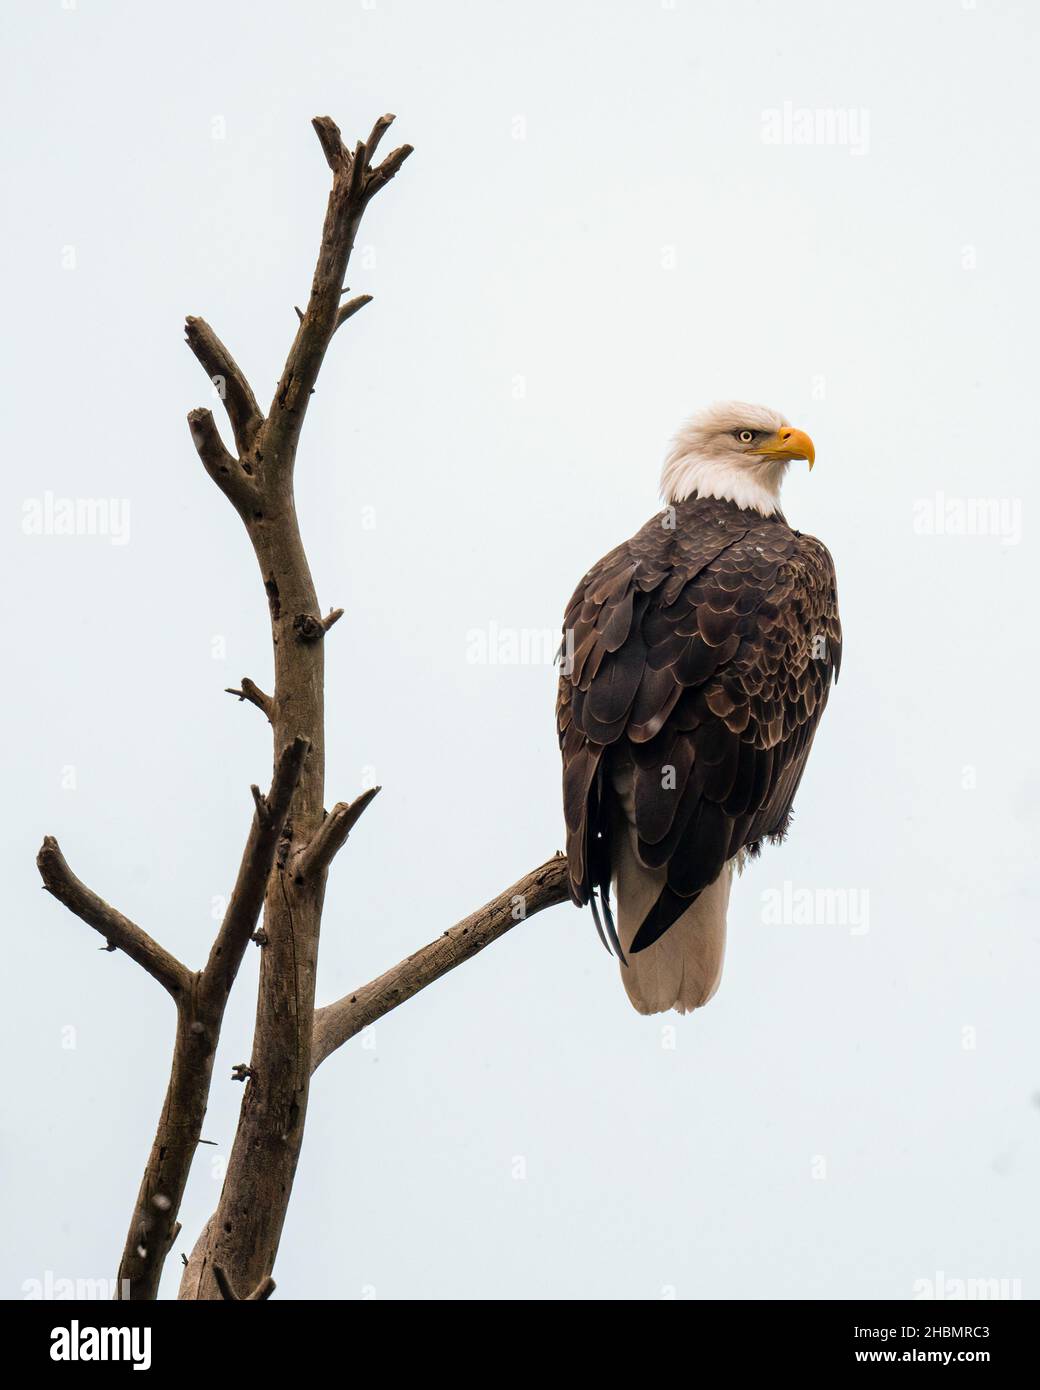 A Bald Eagle (Haliaeetus leucocephalus) perched on a dead tree in the winter in Michigan, USA. Stock Photo